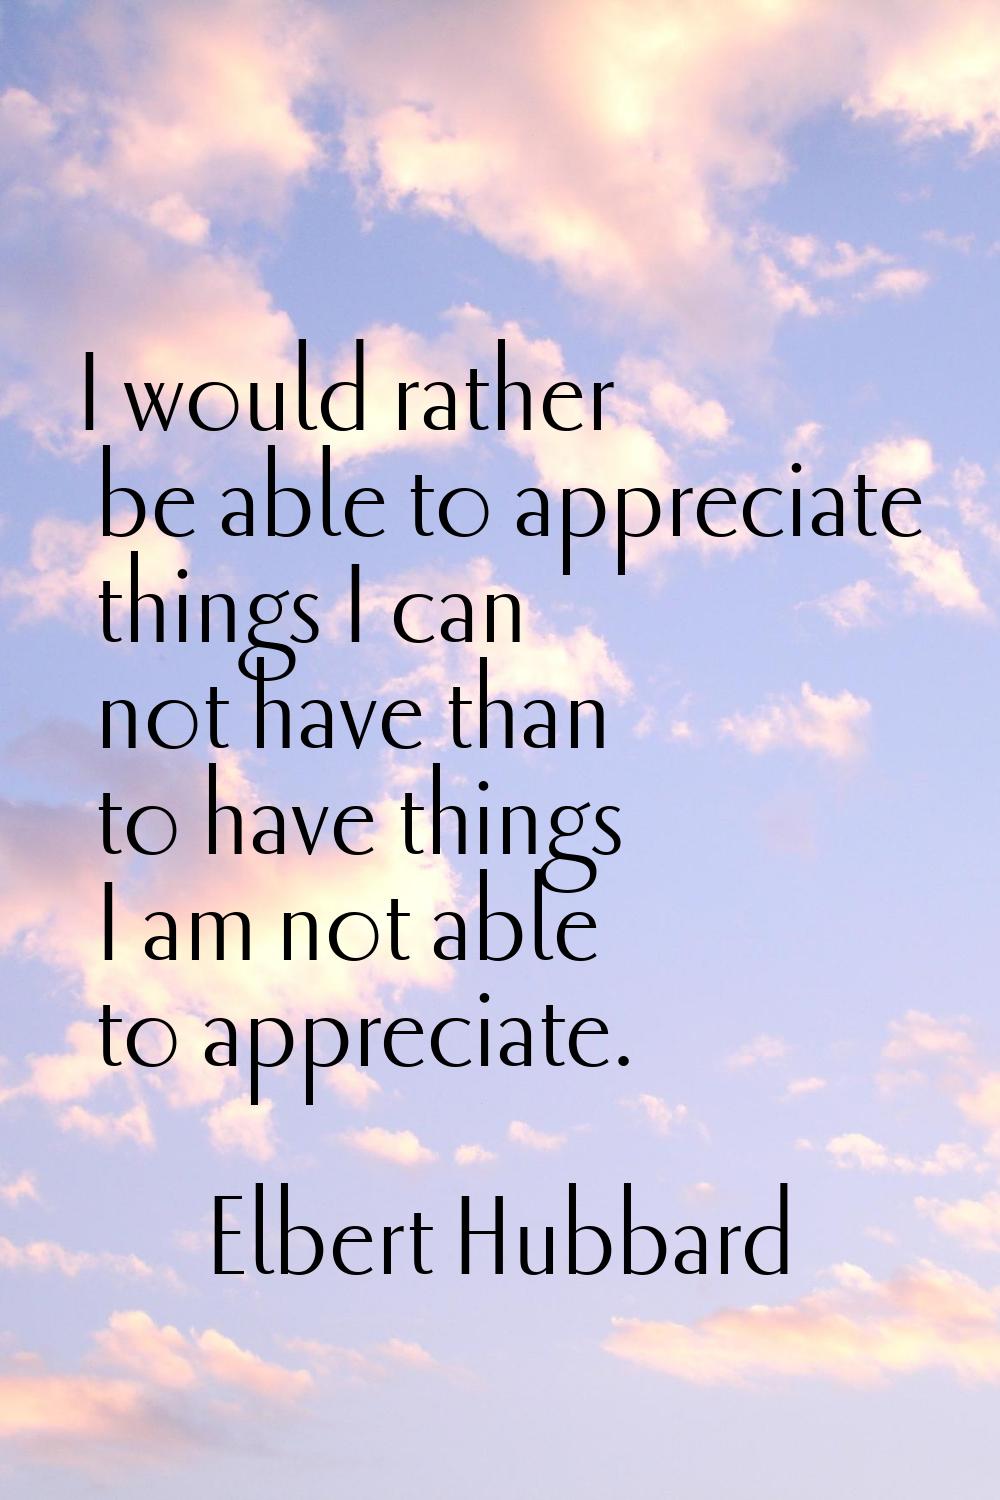 I would rather be able to appreciate things I can not have than to have things I am not able to app